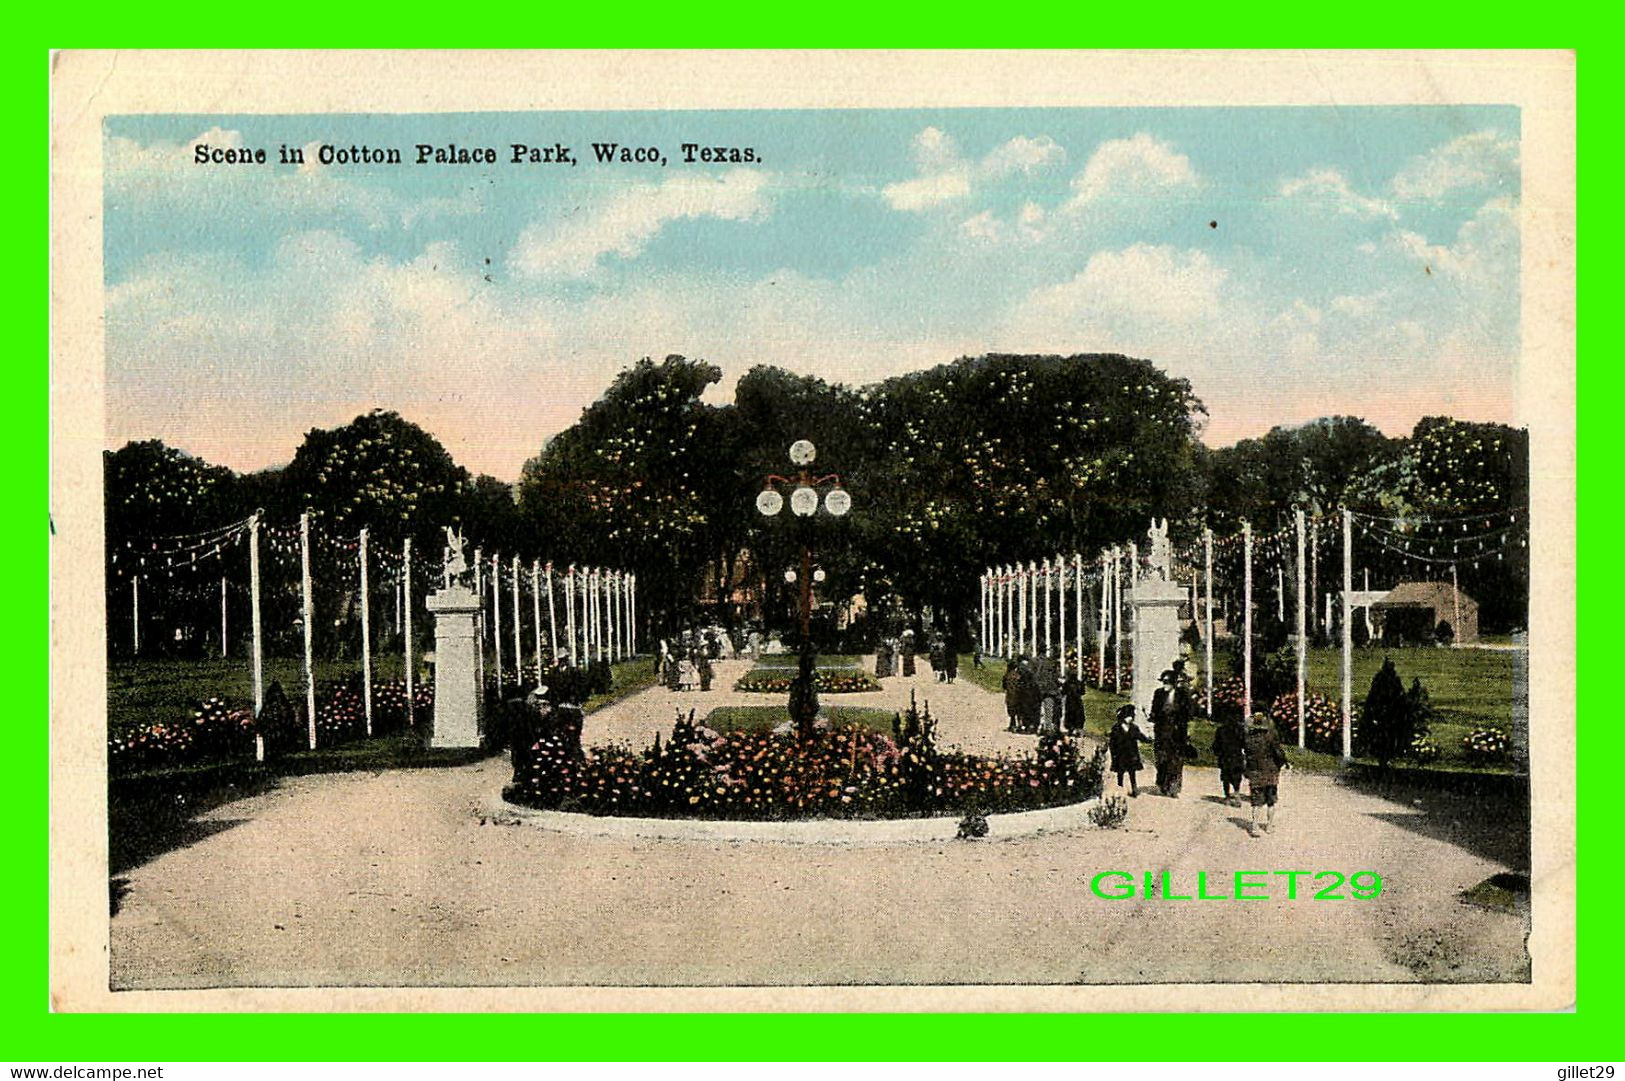 WACO, TX - SCENE IN COTTON PALACE PARK - ANIMATED WITH PEOPLES - TRAVEL IN 1921 - C. KROPP CO - - Waco